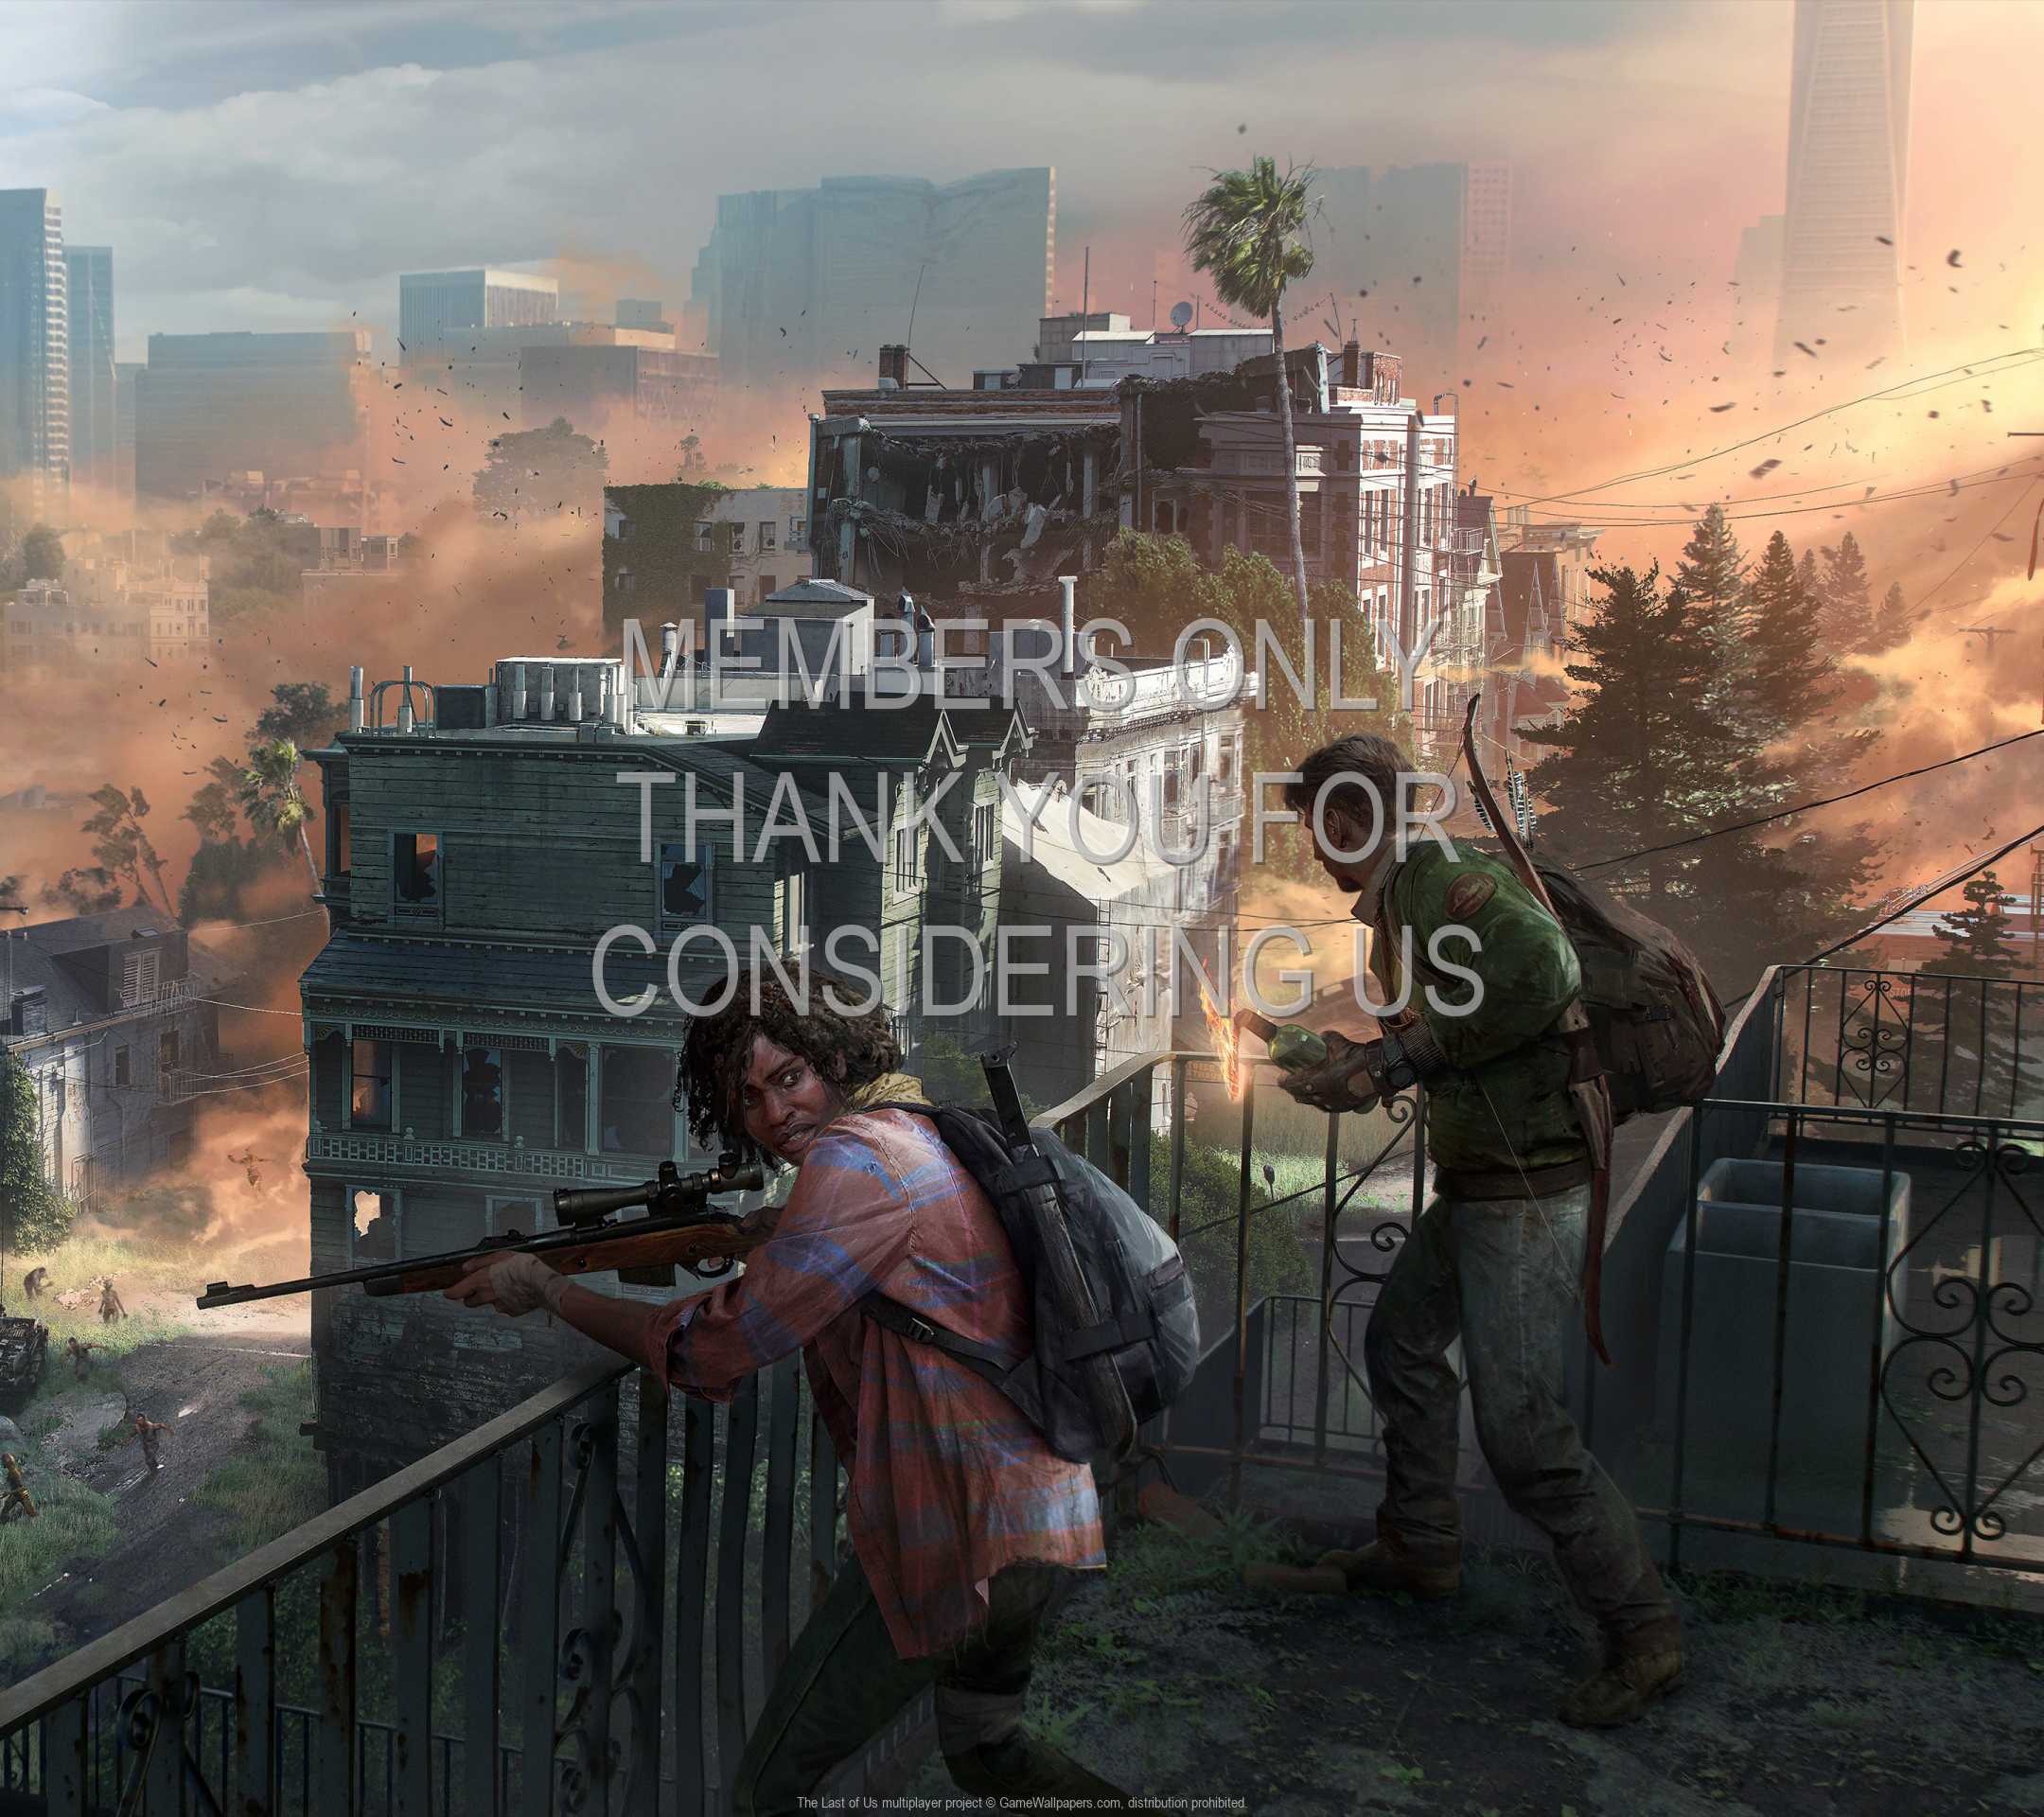 The Last of Us multiplayer project 1080p Horizontal Mobile fond d'cran 01